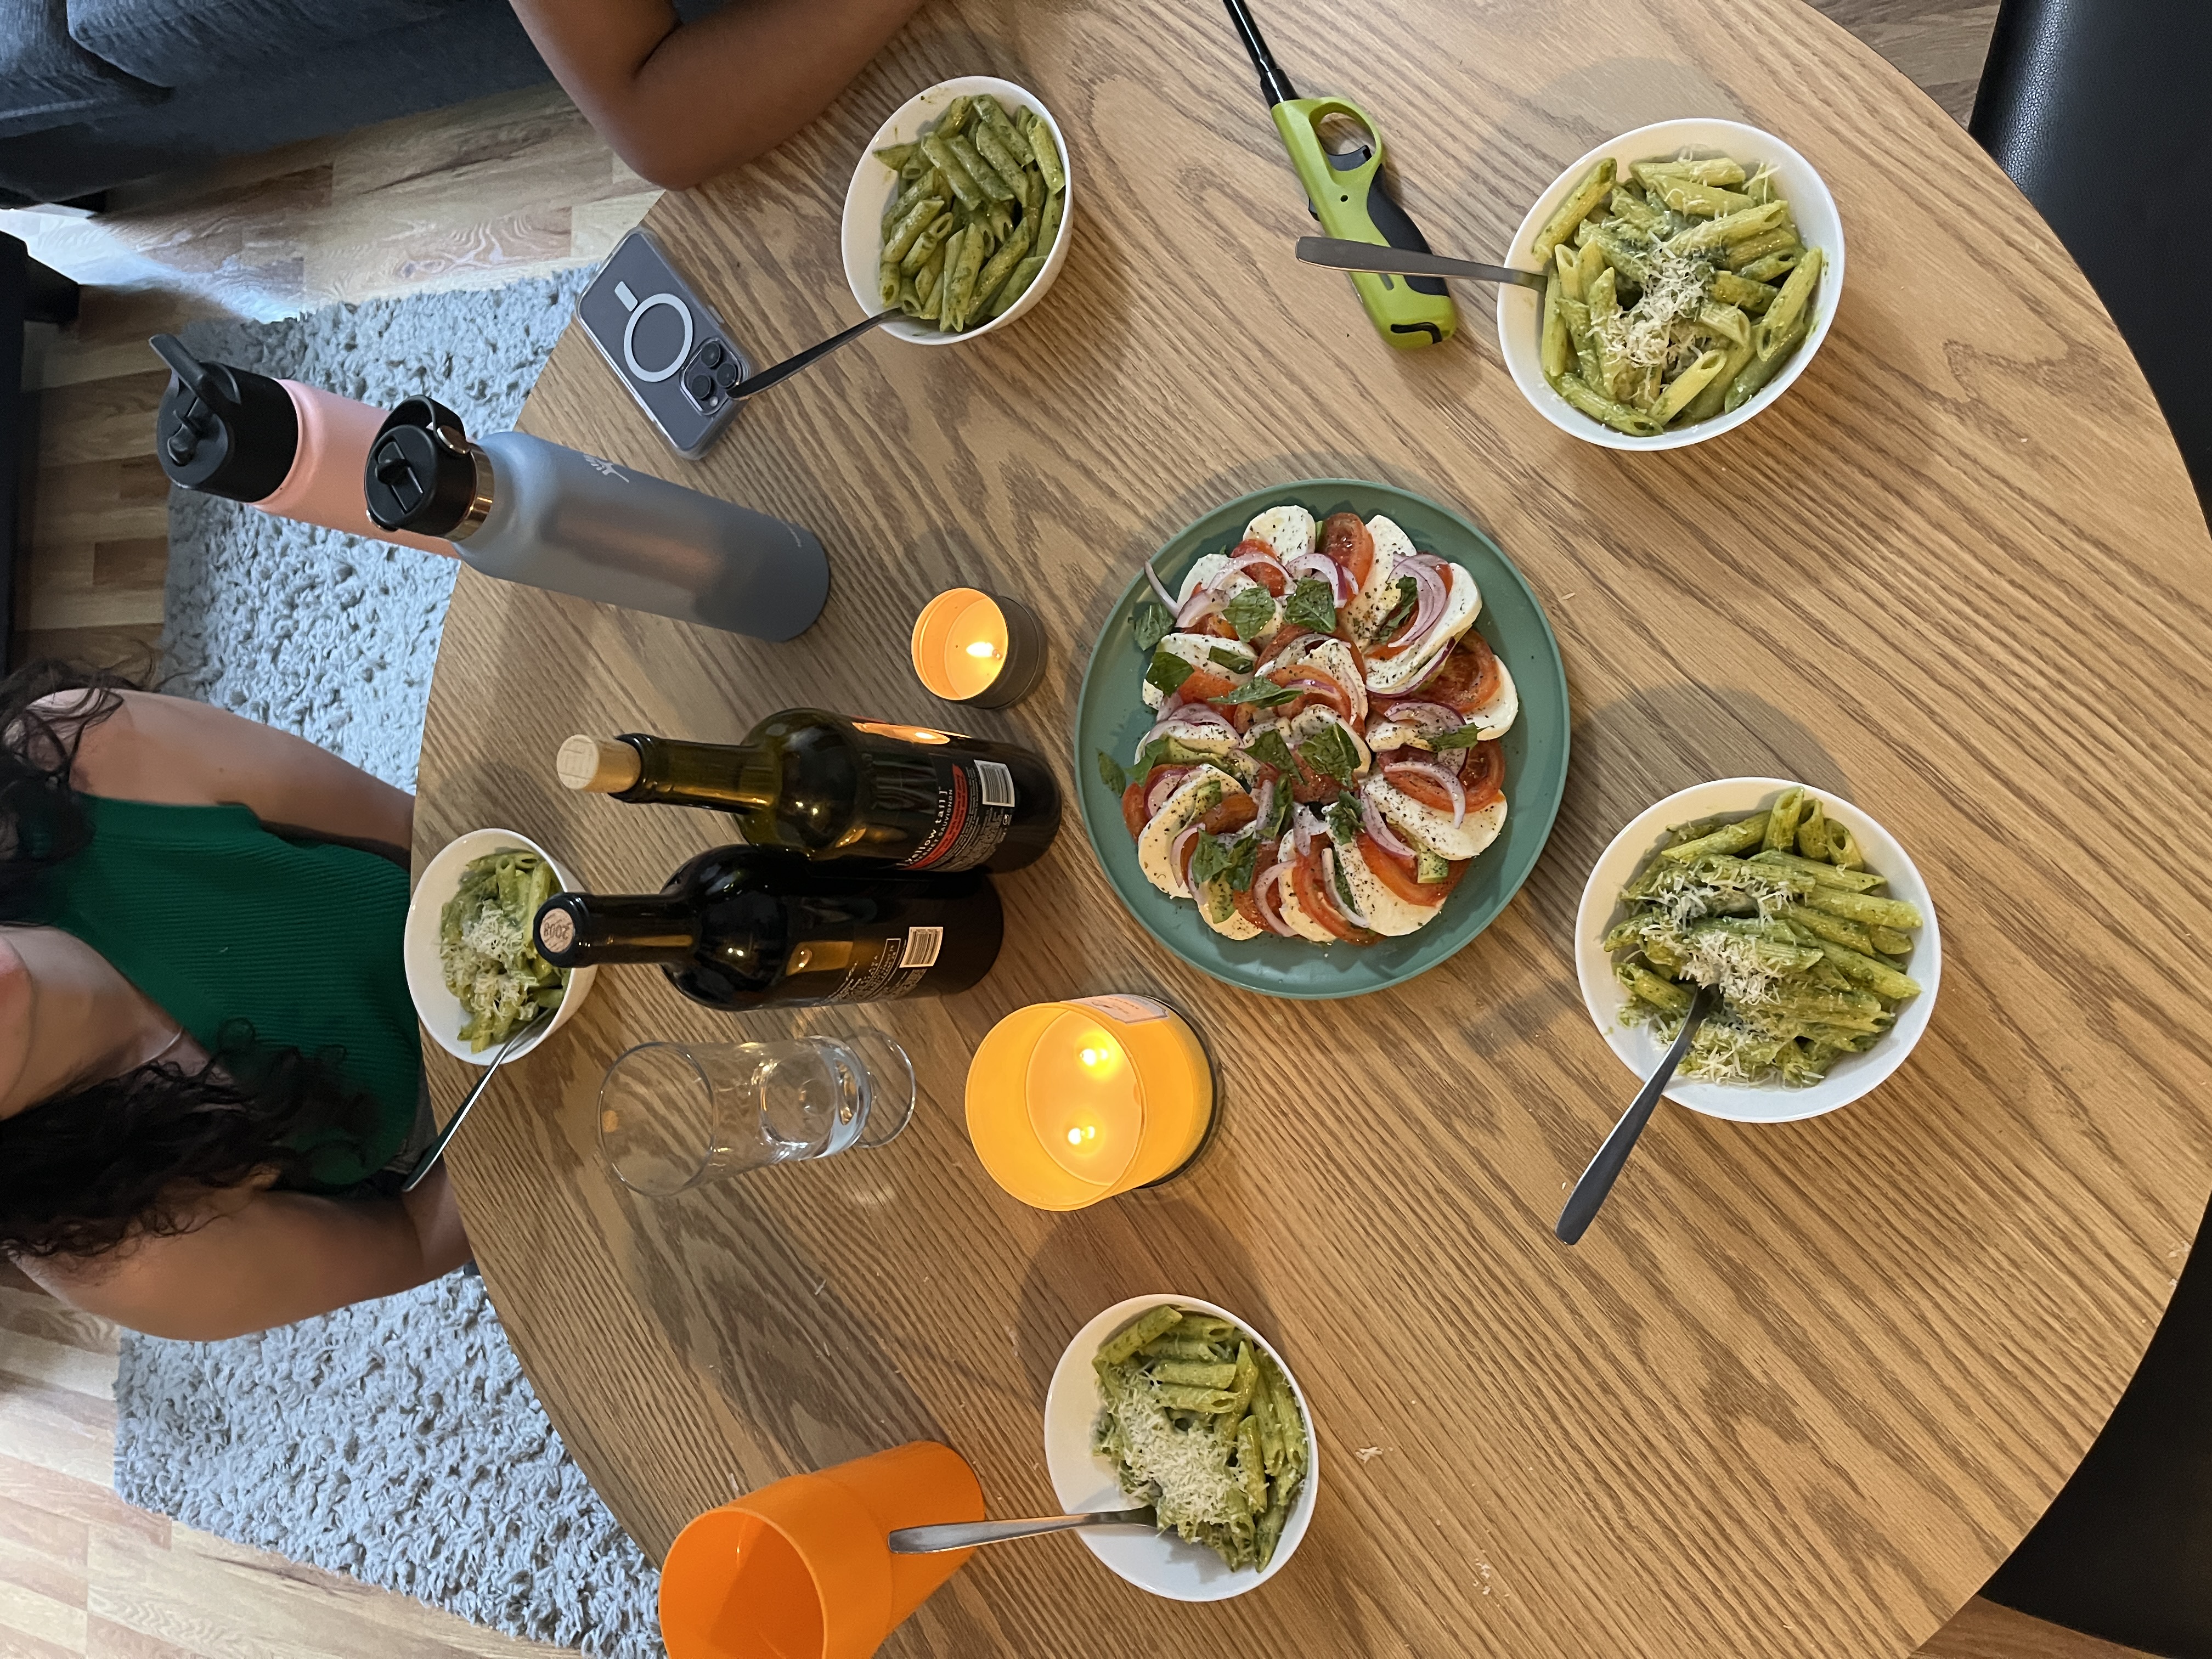 Dinner is served on a round table with pesto pasta in white bowls.